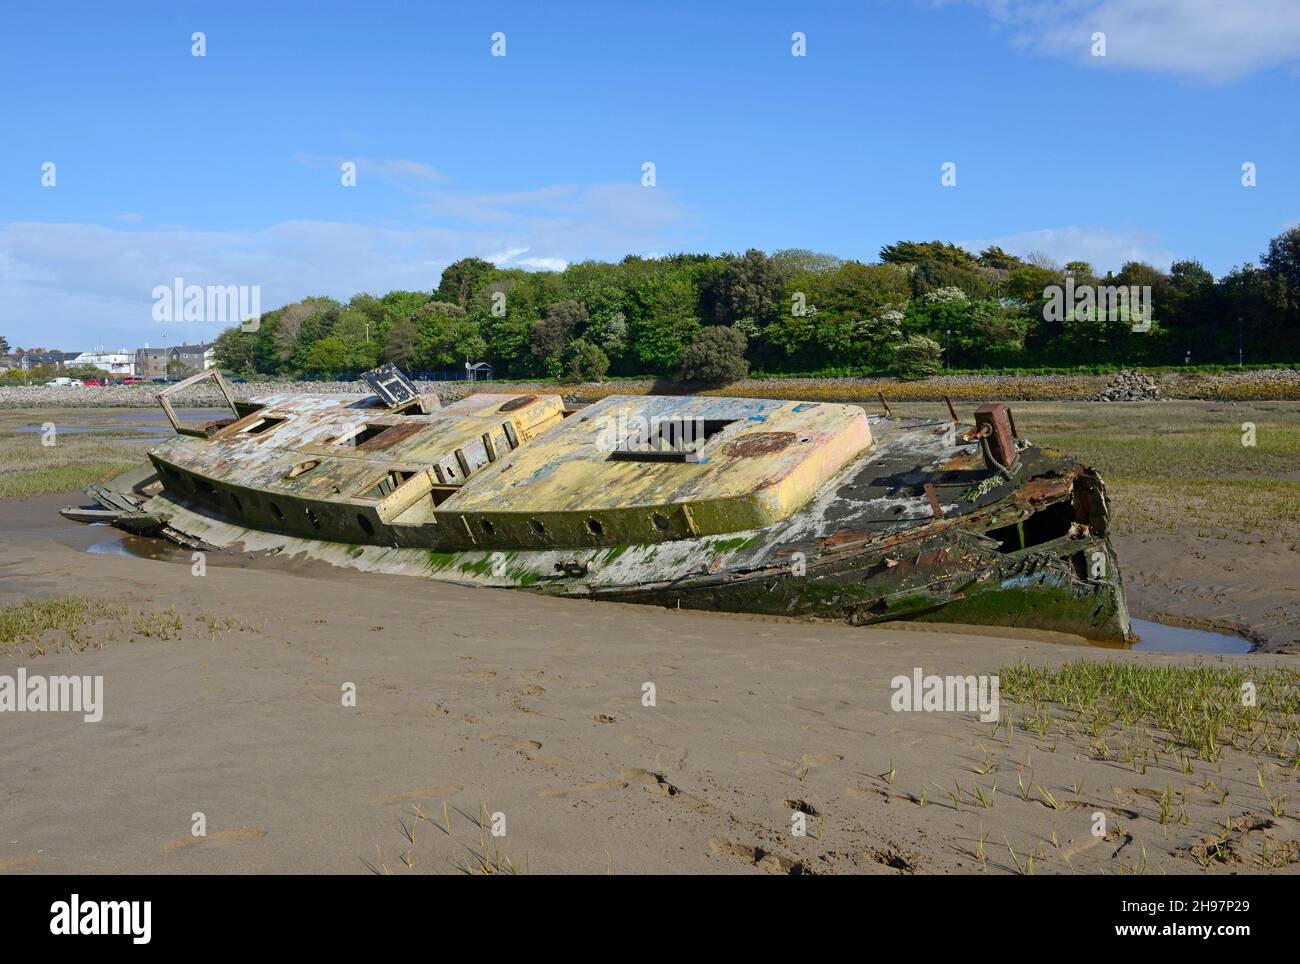 A derelict boat lies beached in the harbour at Barry Island, Wales, UK Stock Photo